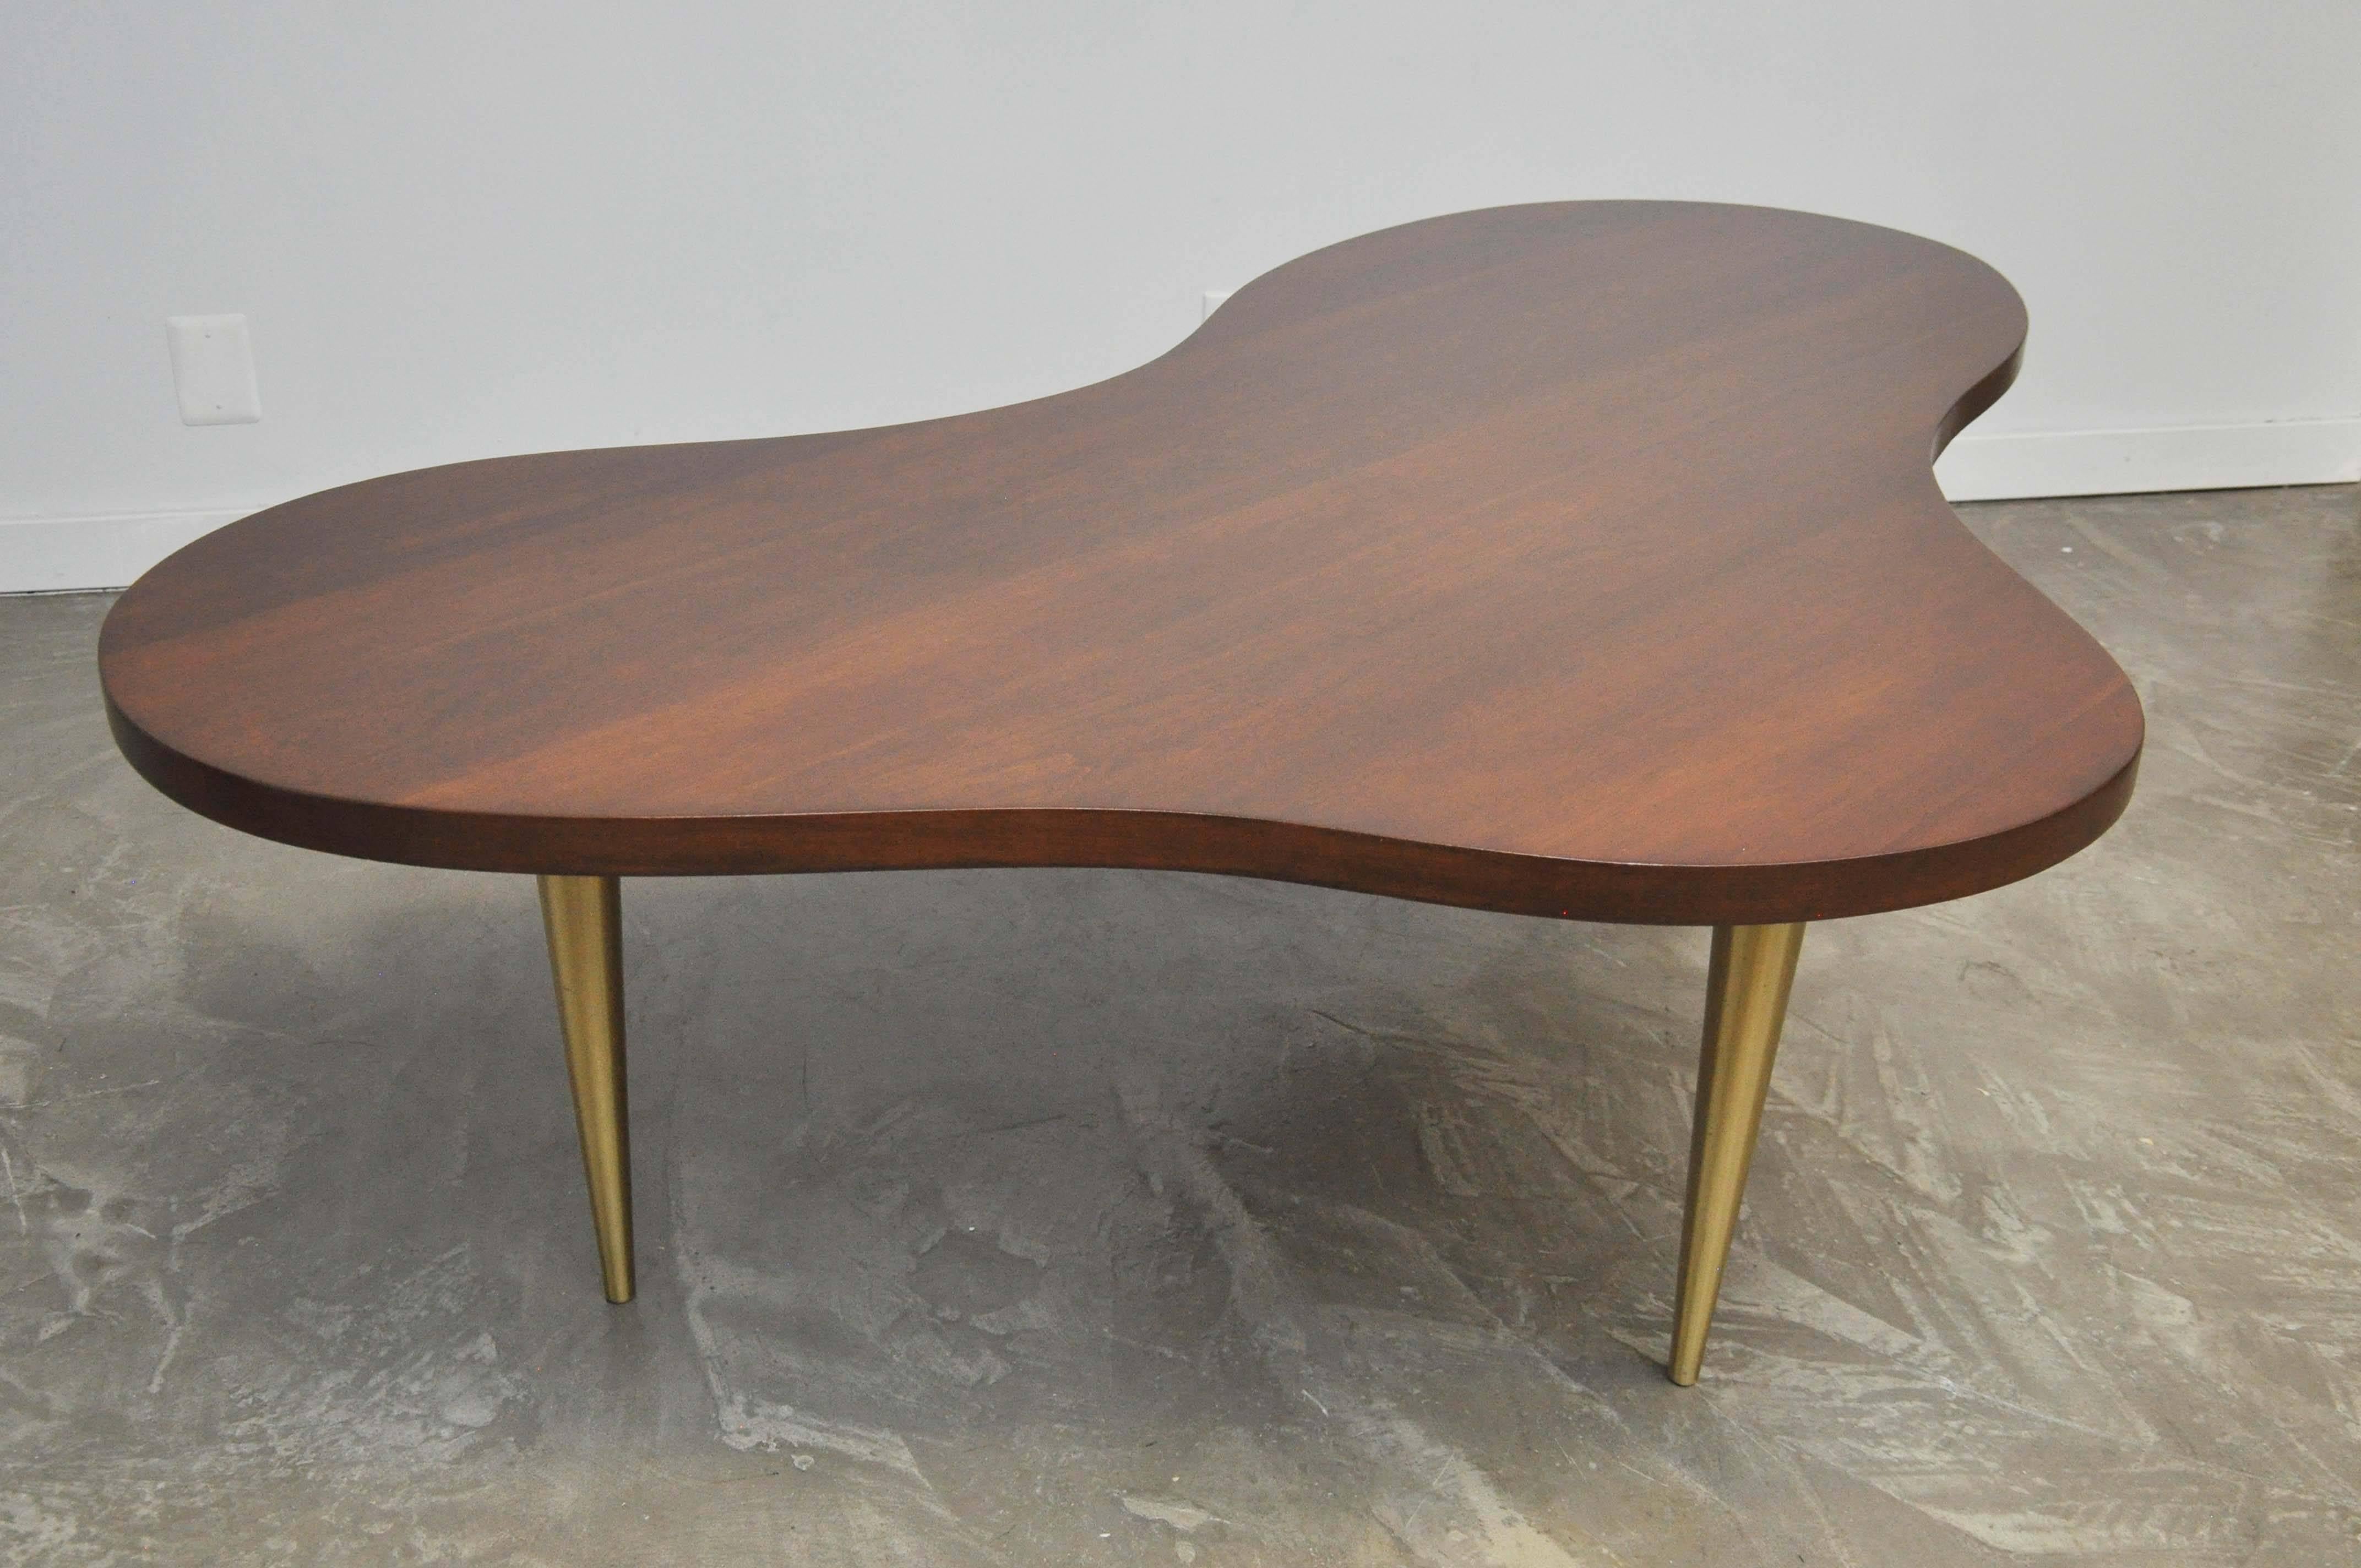 Monumental Biomorphic Walnut and Brass Table by T.H. Robsjohn-Gibbings 3